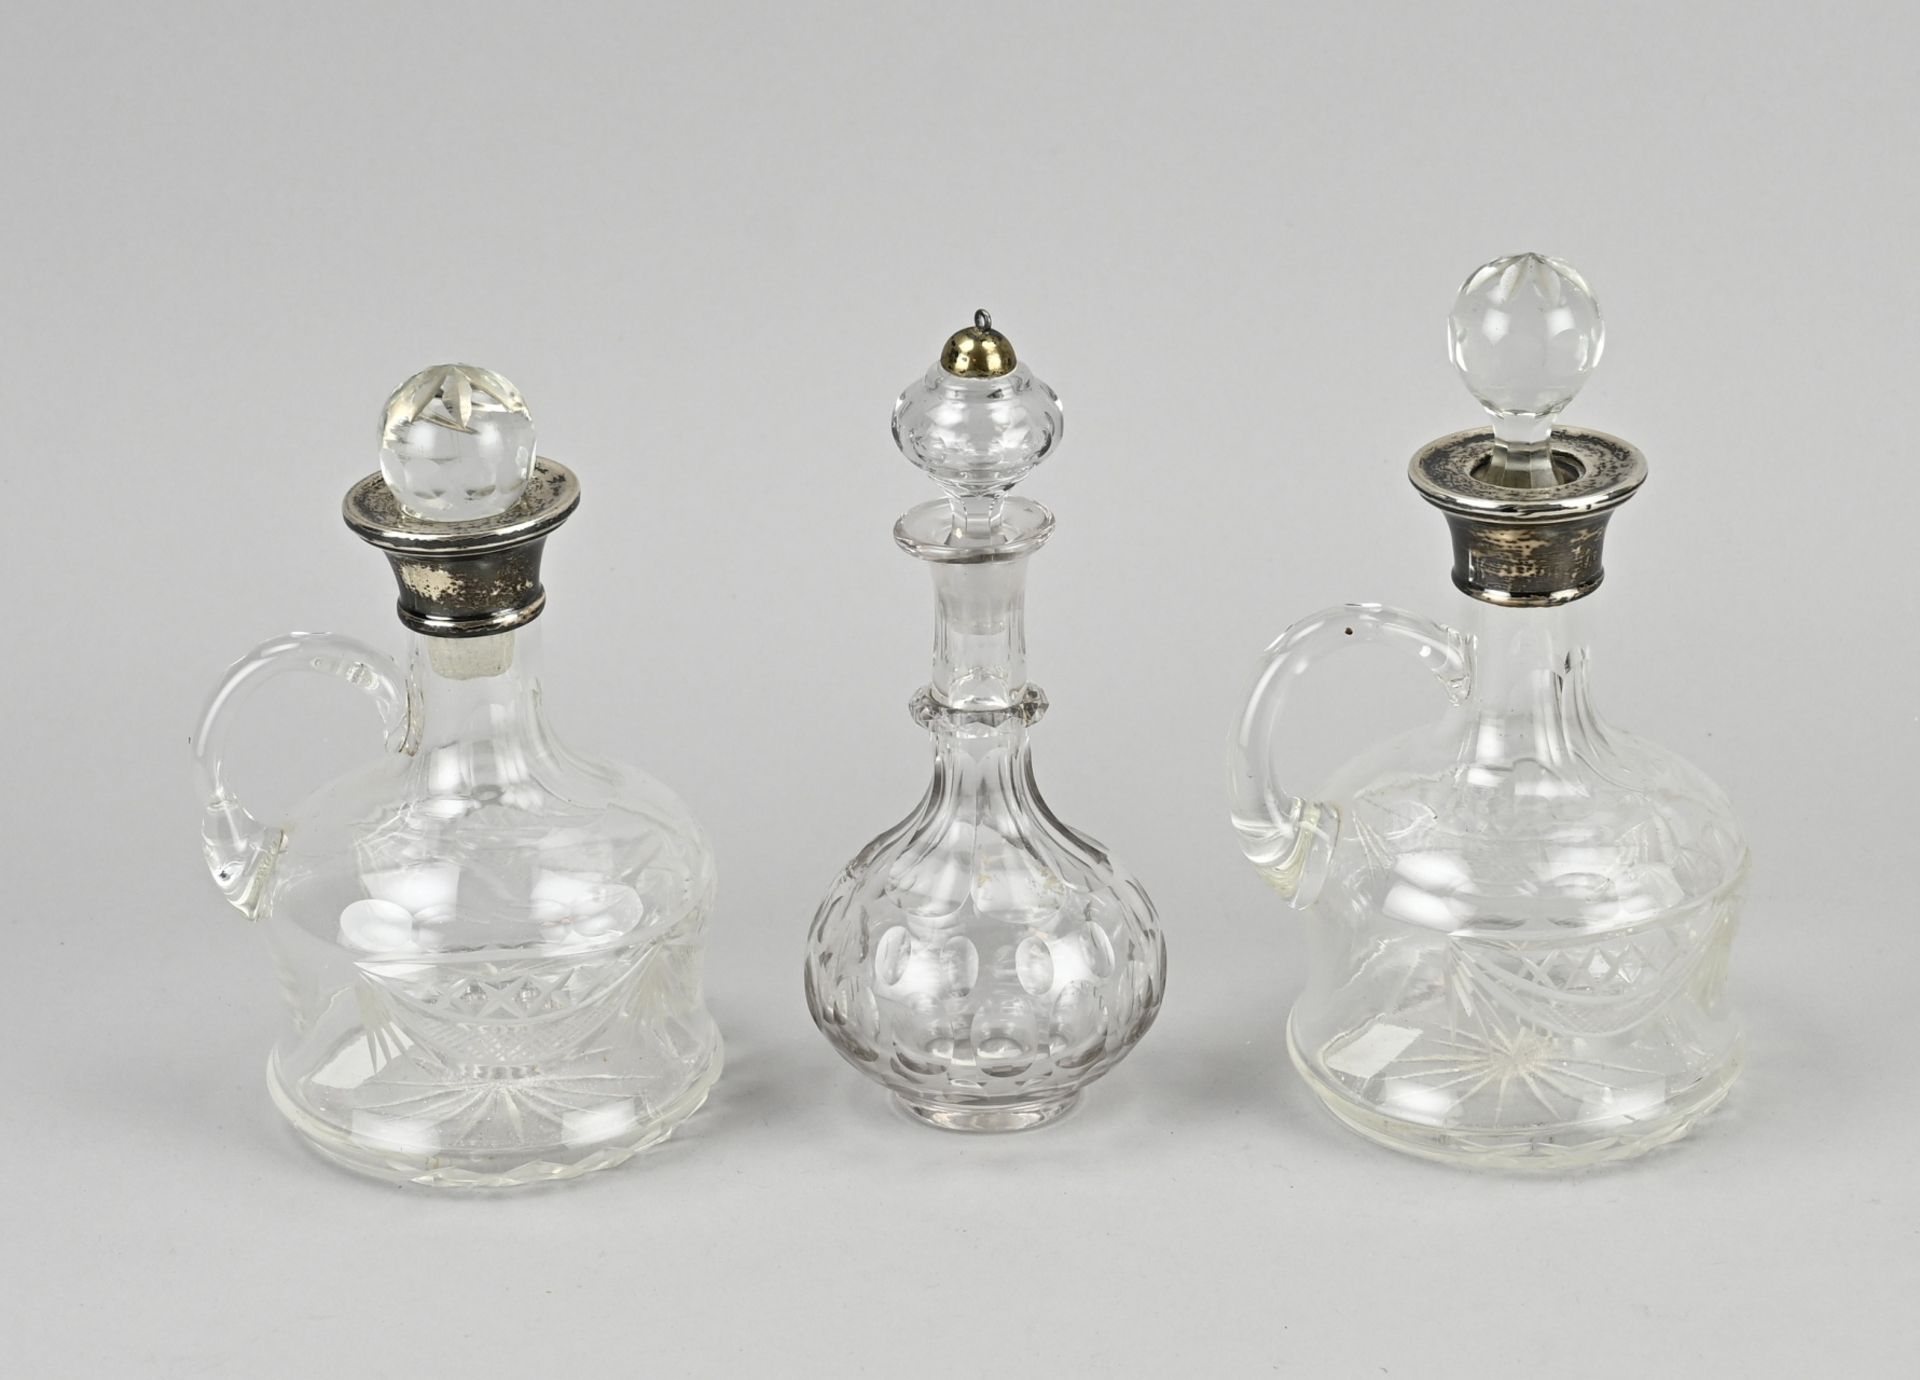 3 Decanters with silverware